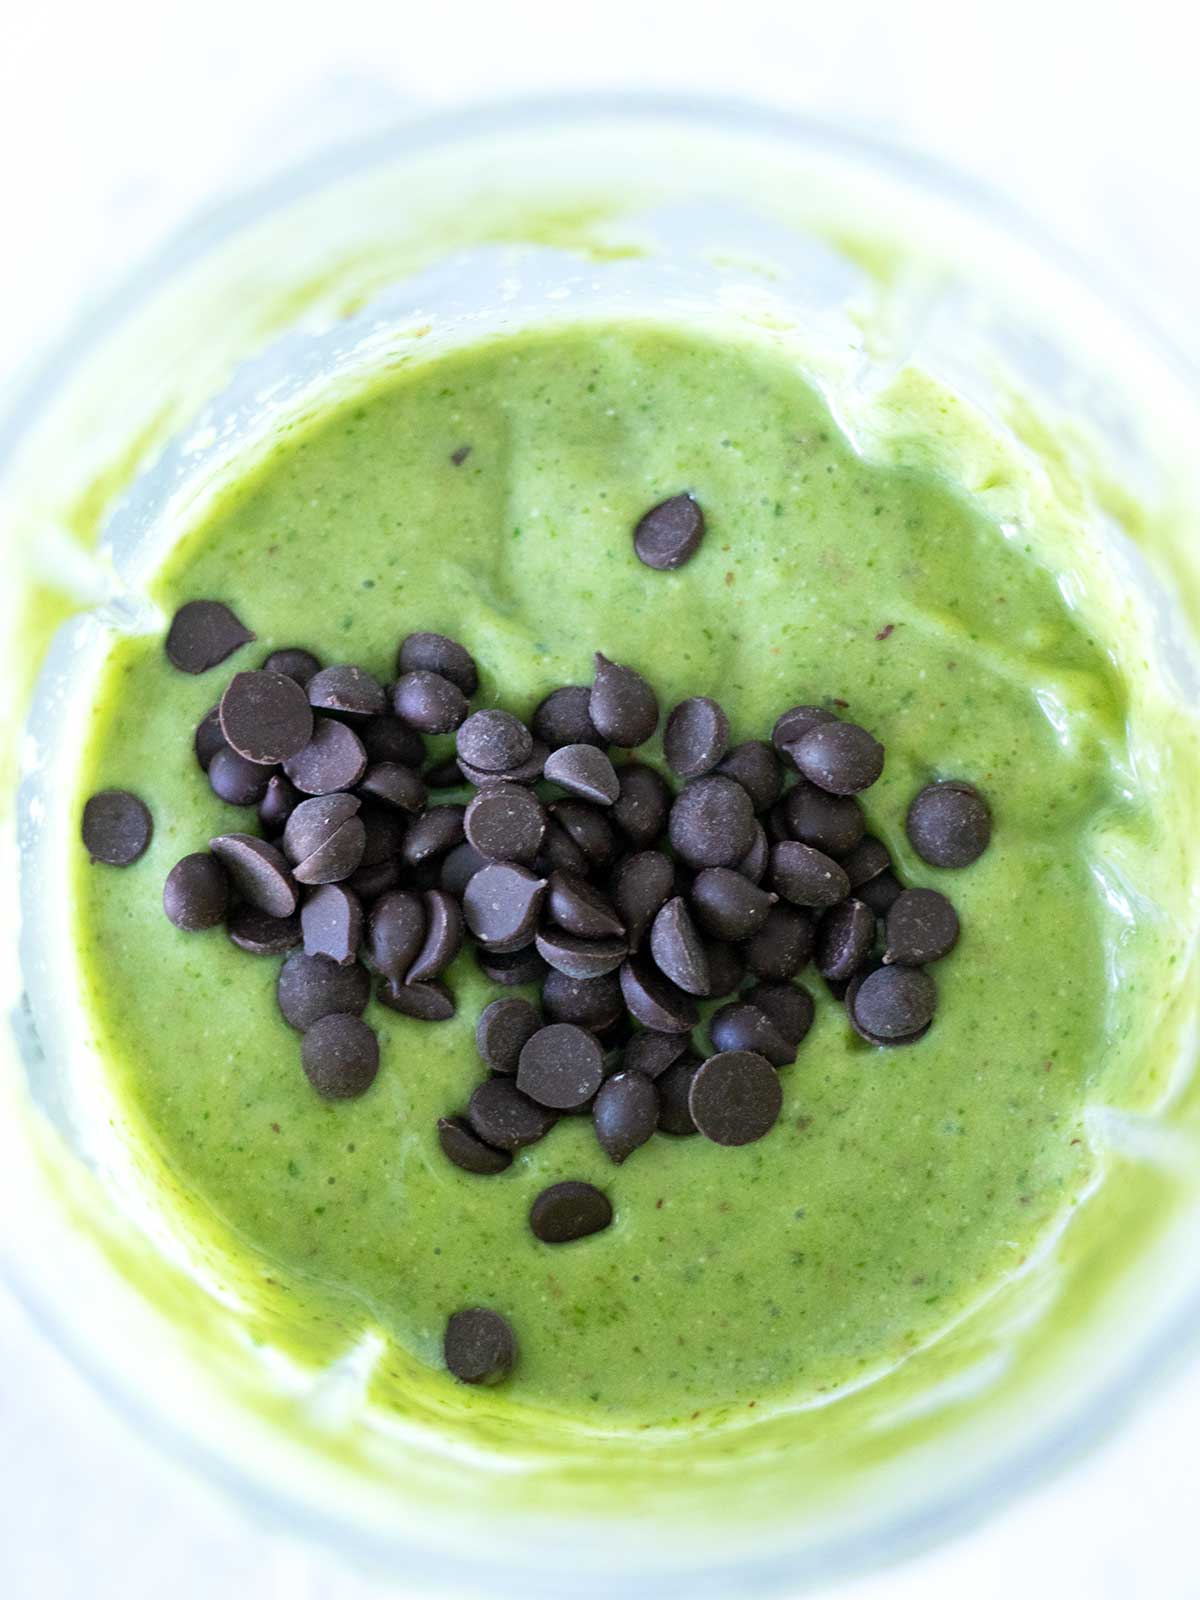 Green mint shake topped with vegan dairy-free chocolate chips.